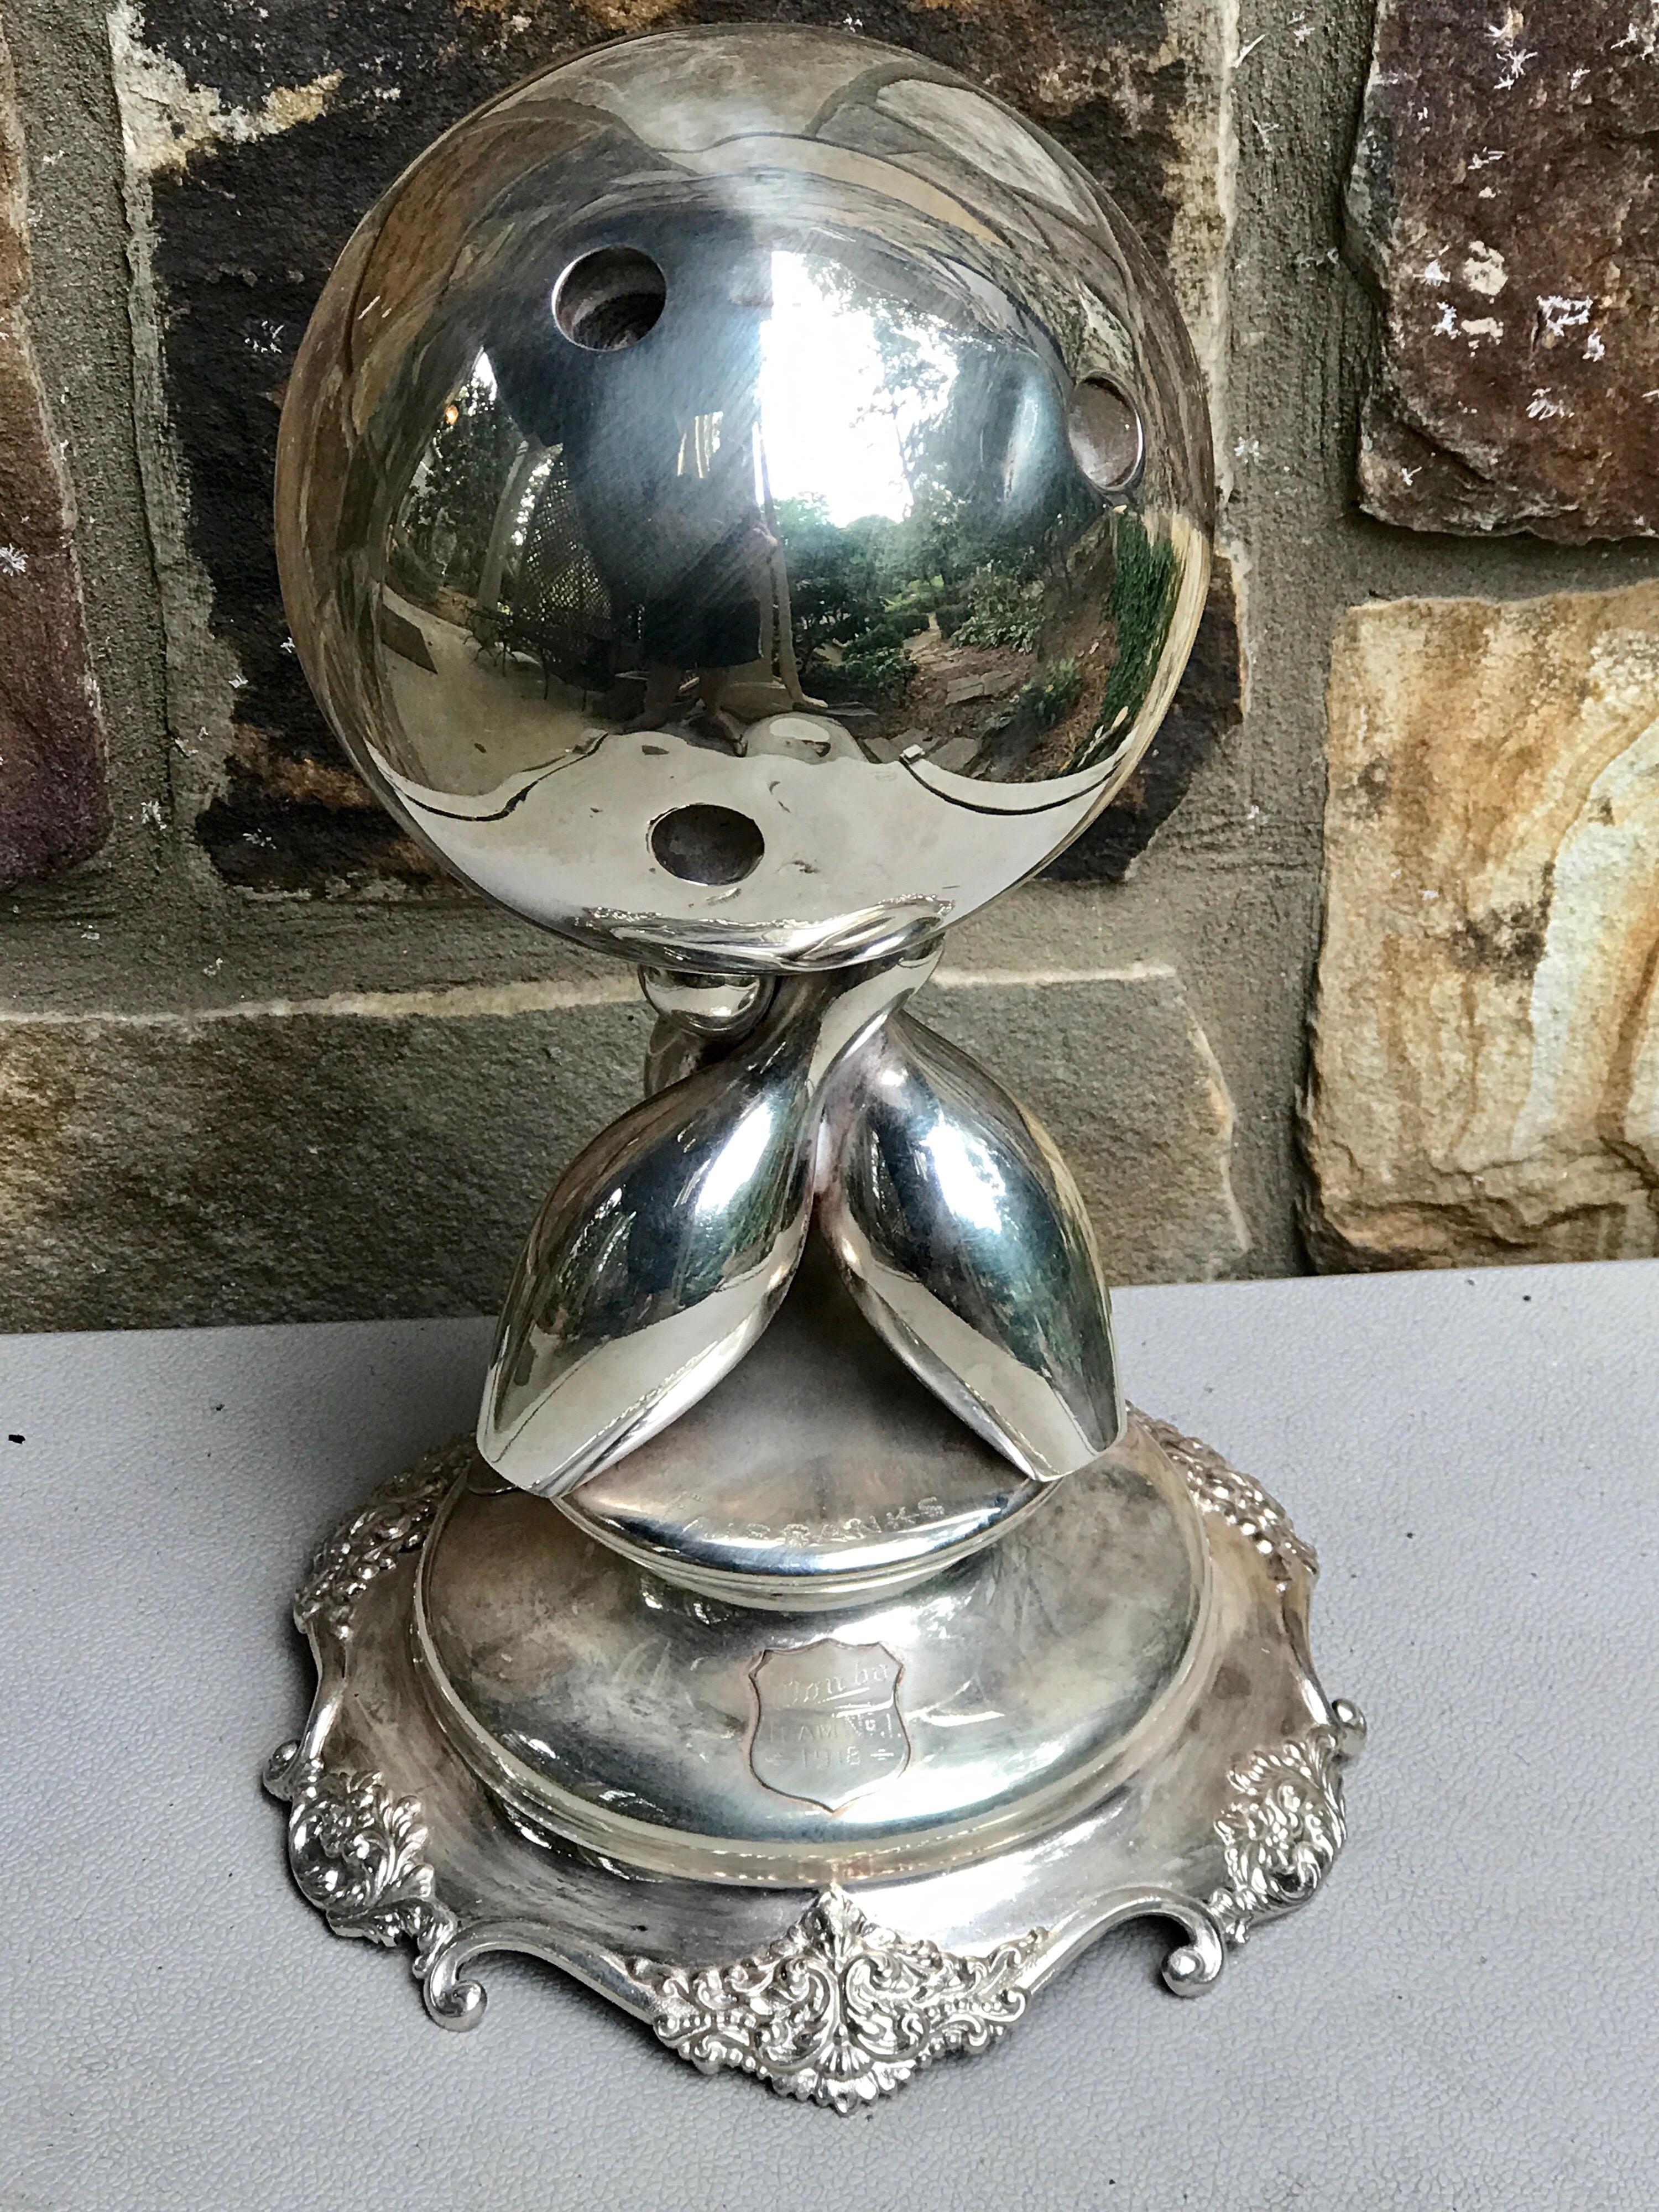 Silver plated 1918 Bowling Trophy, Inscribed Fairbanks Bowling League, won by team #1 1918, by the Van Bergh Silver Company Rochester NY.